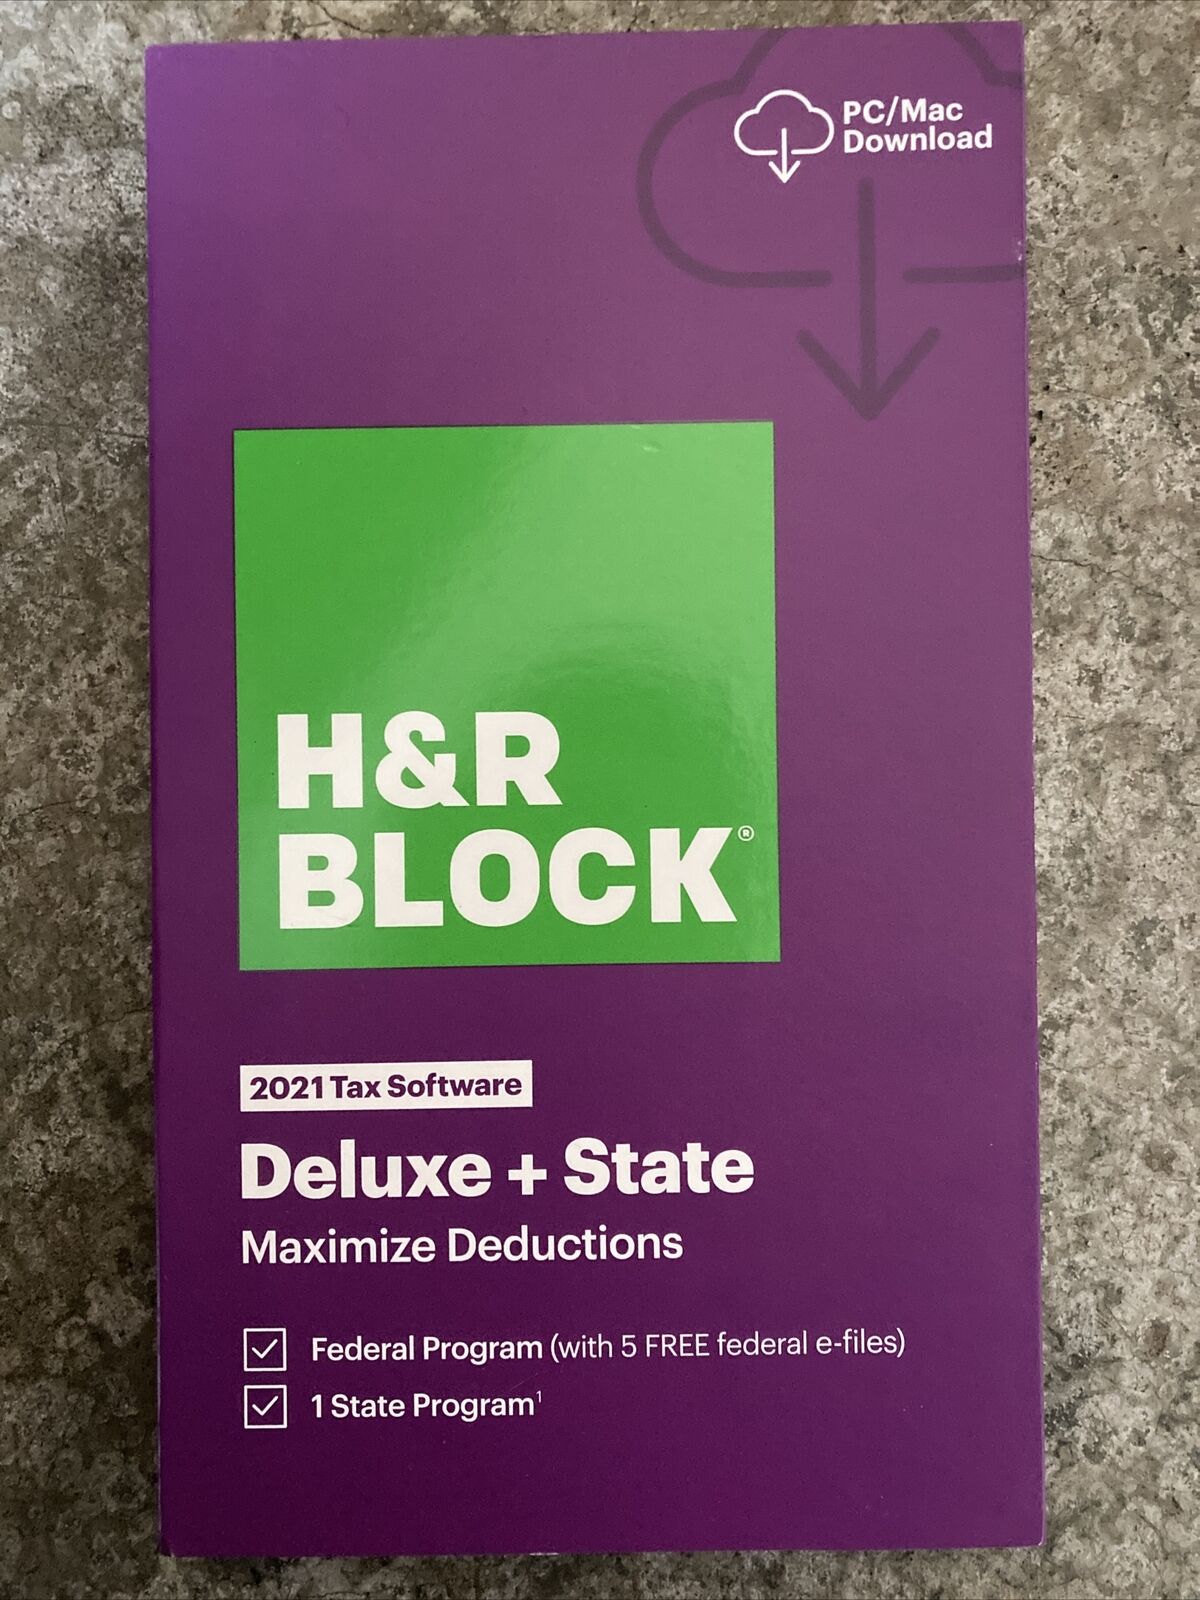 H&R BLOCK Tax Software Deluxe + State 2021 FAST SHIPPING WITH TRACKING